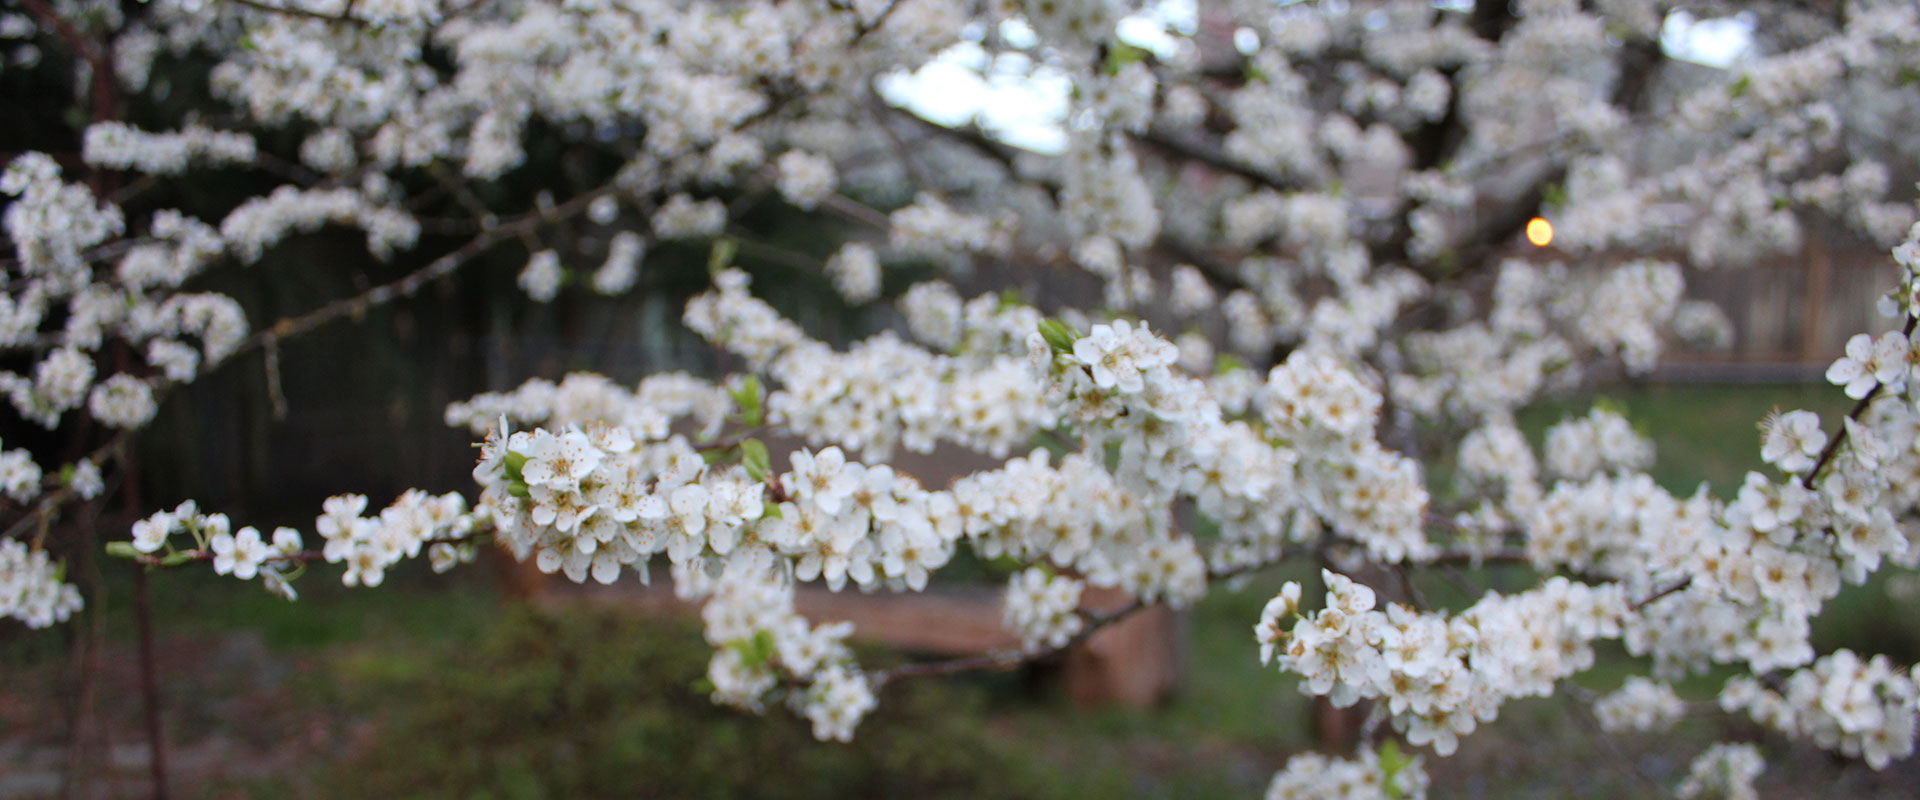 White blossoms of an Asian plum tree in full bloom